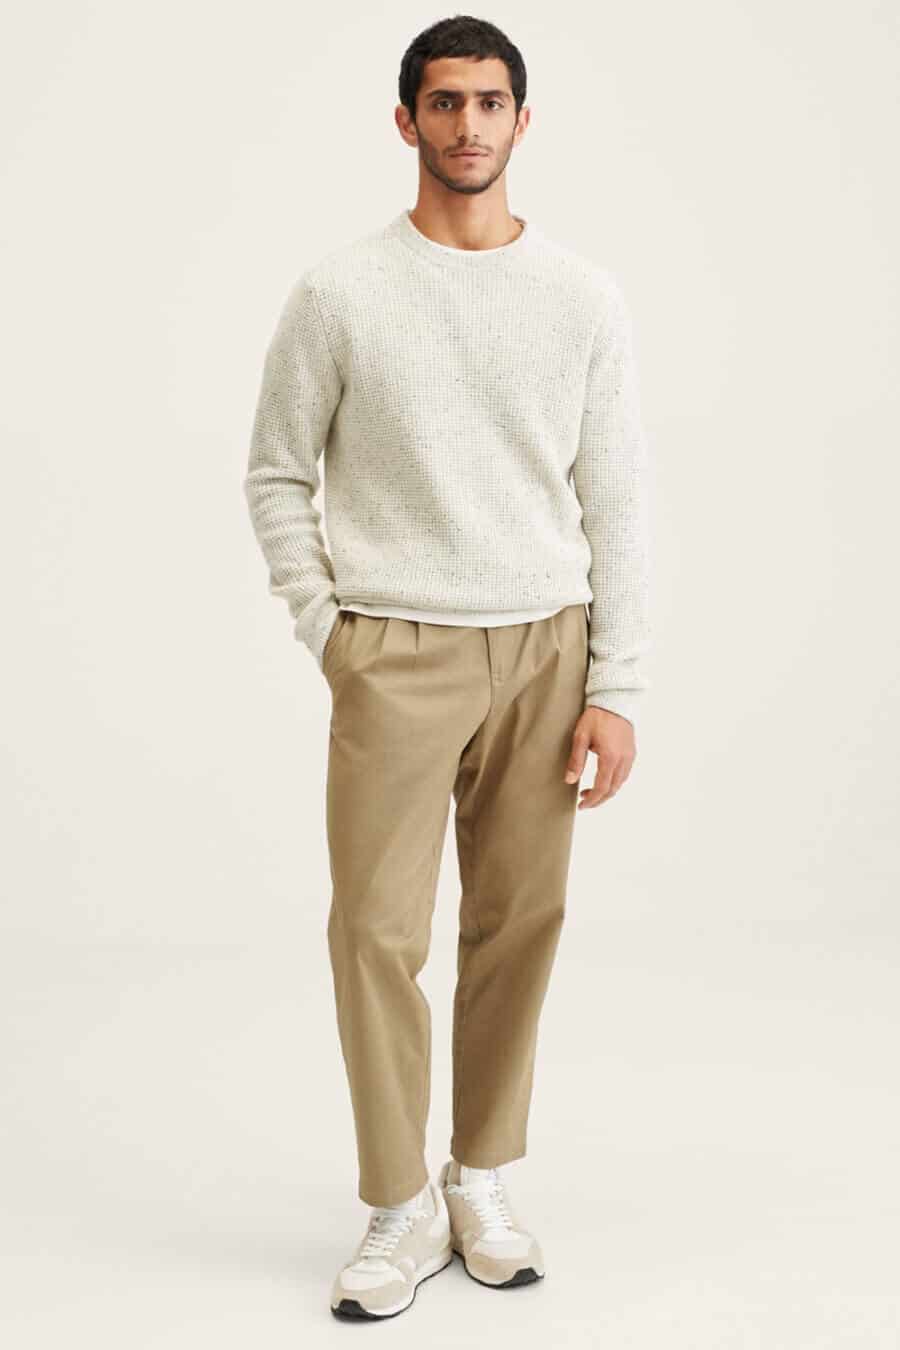 Men's khaki pants outfit with white crew neck sweater and white running sneakers